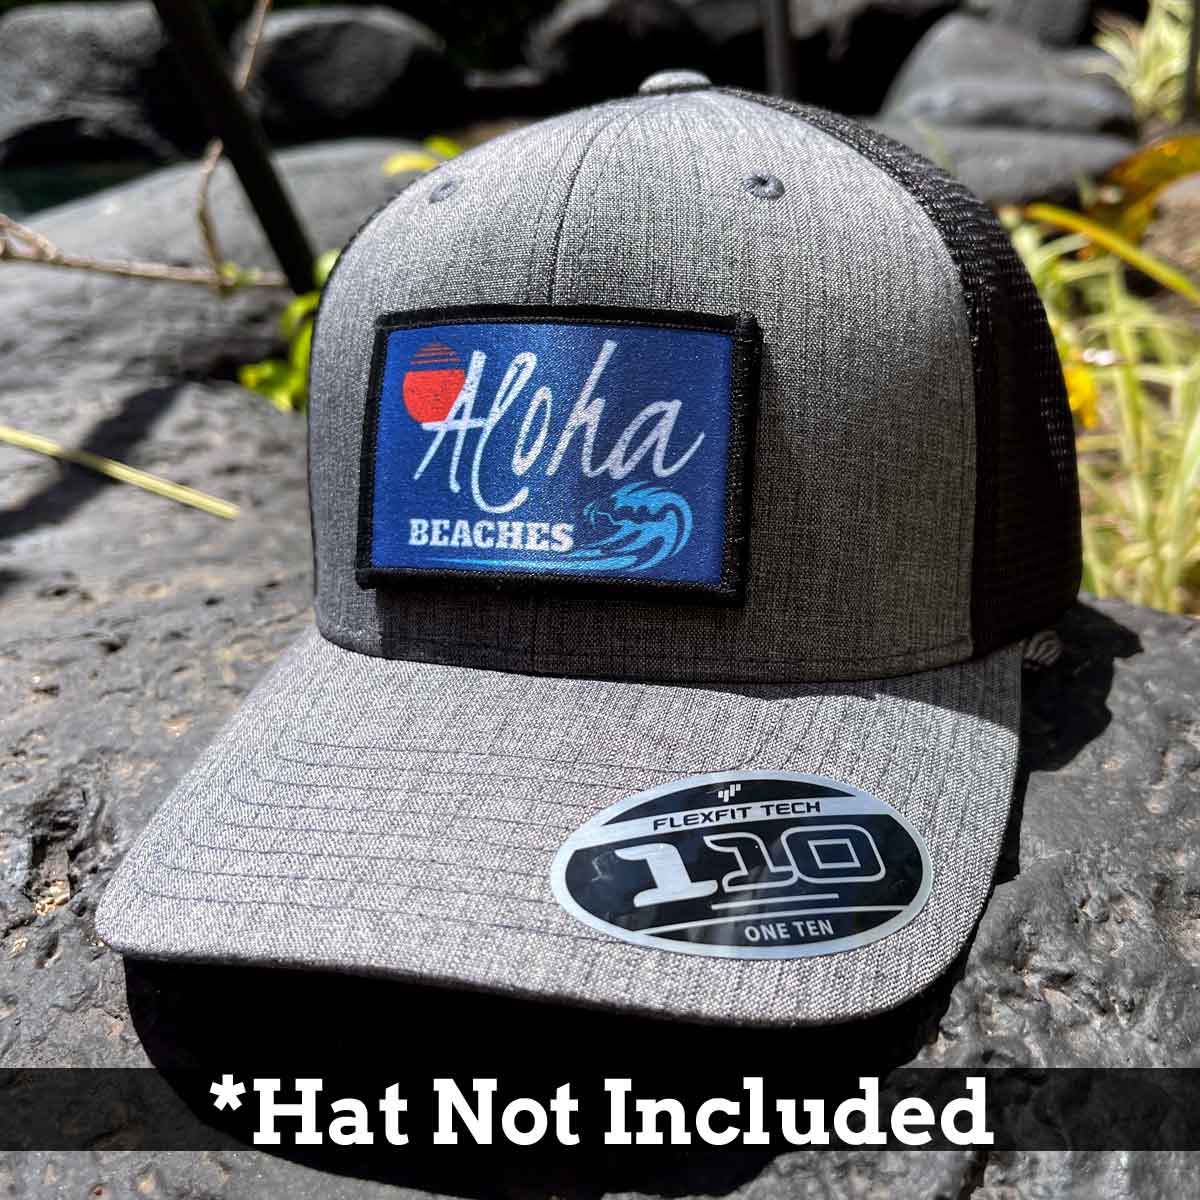 Aloha Beaches - Removable Patch - Pull Patch - Removable Patches For Authentic Flexfit and Snapback Hats